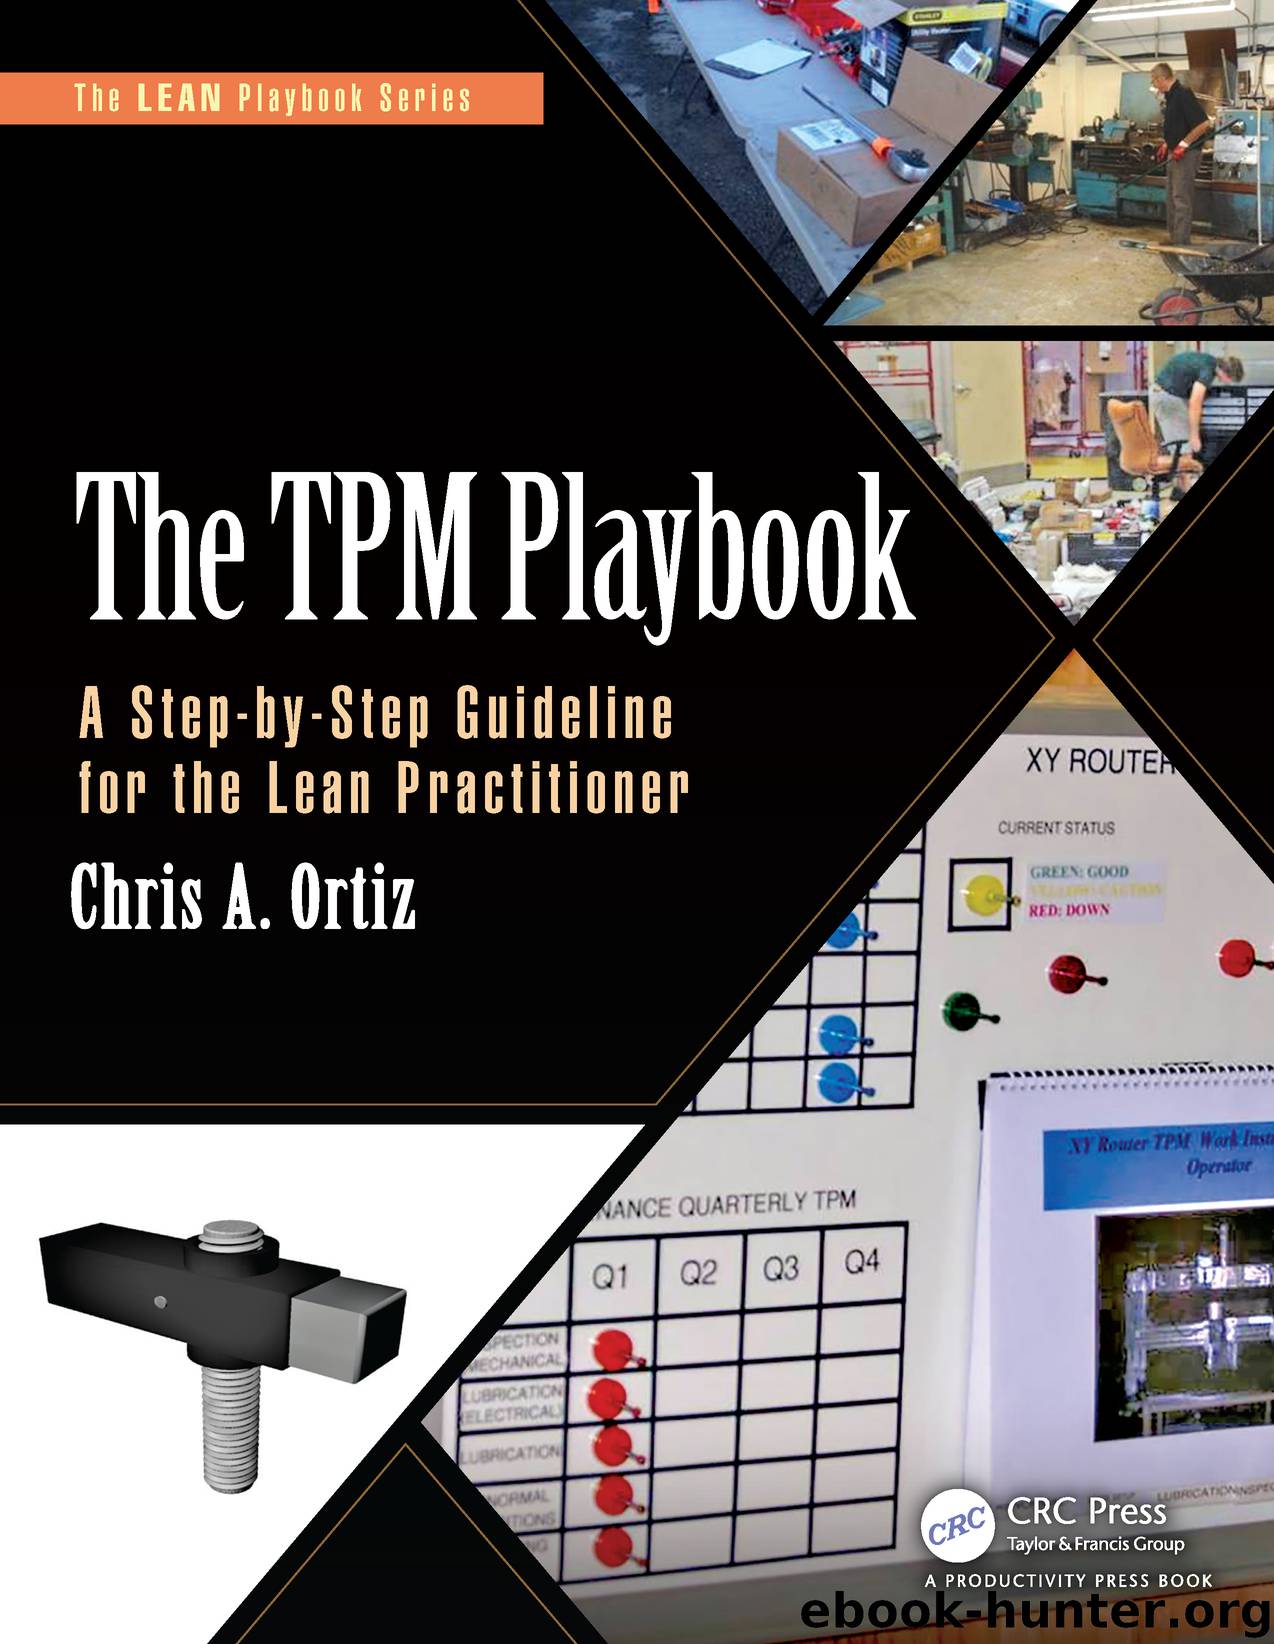 The TPM Playbook: A Step-by-Step Guideline for the Lean Practitioner by Chris A. Ortiz